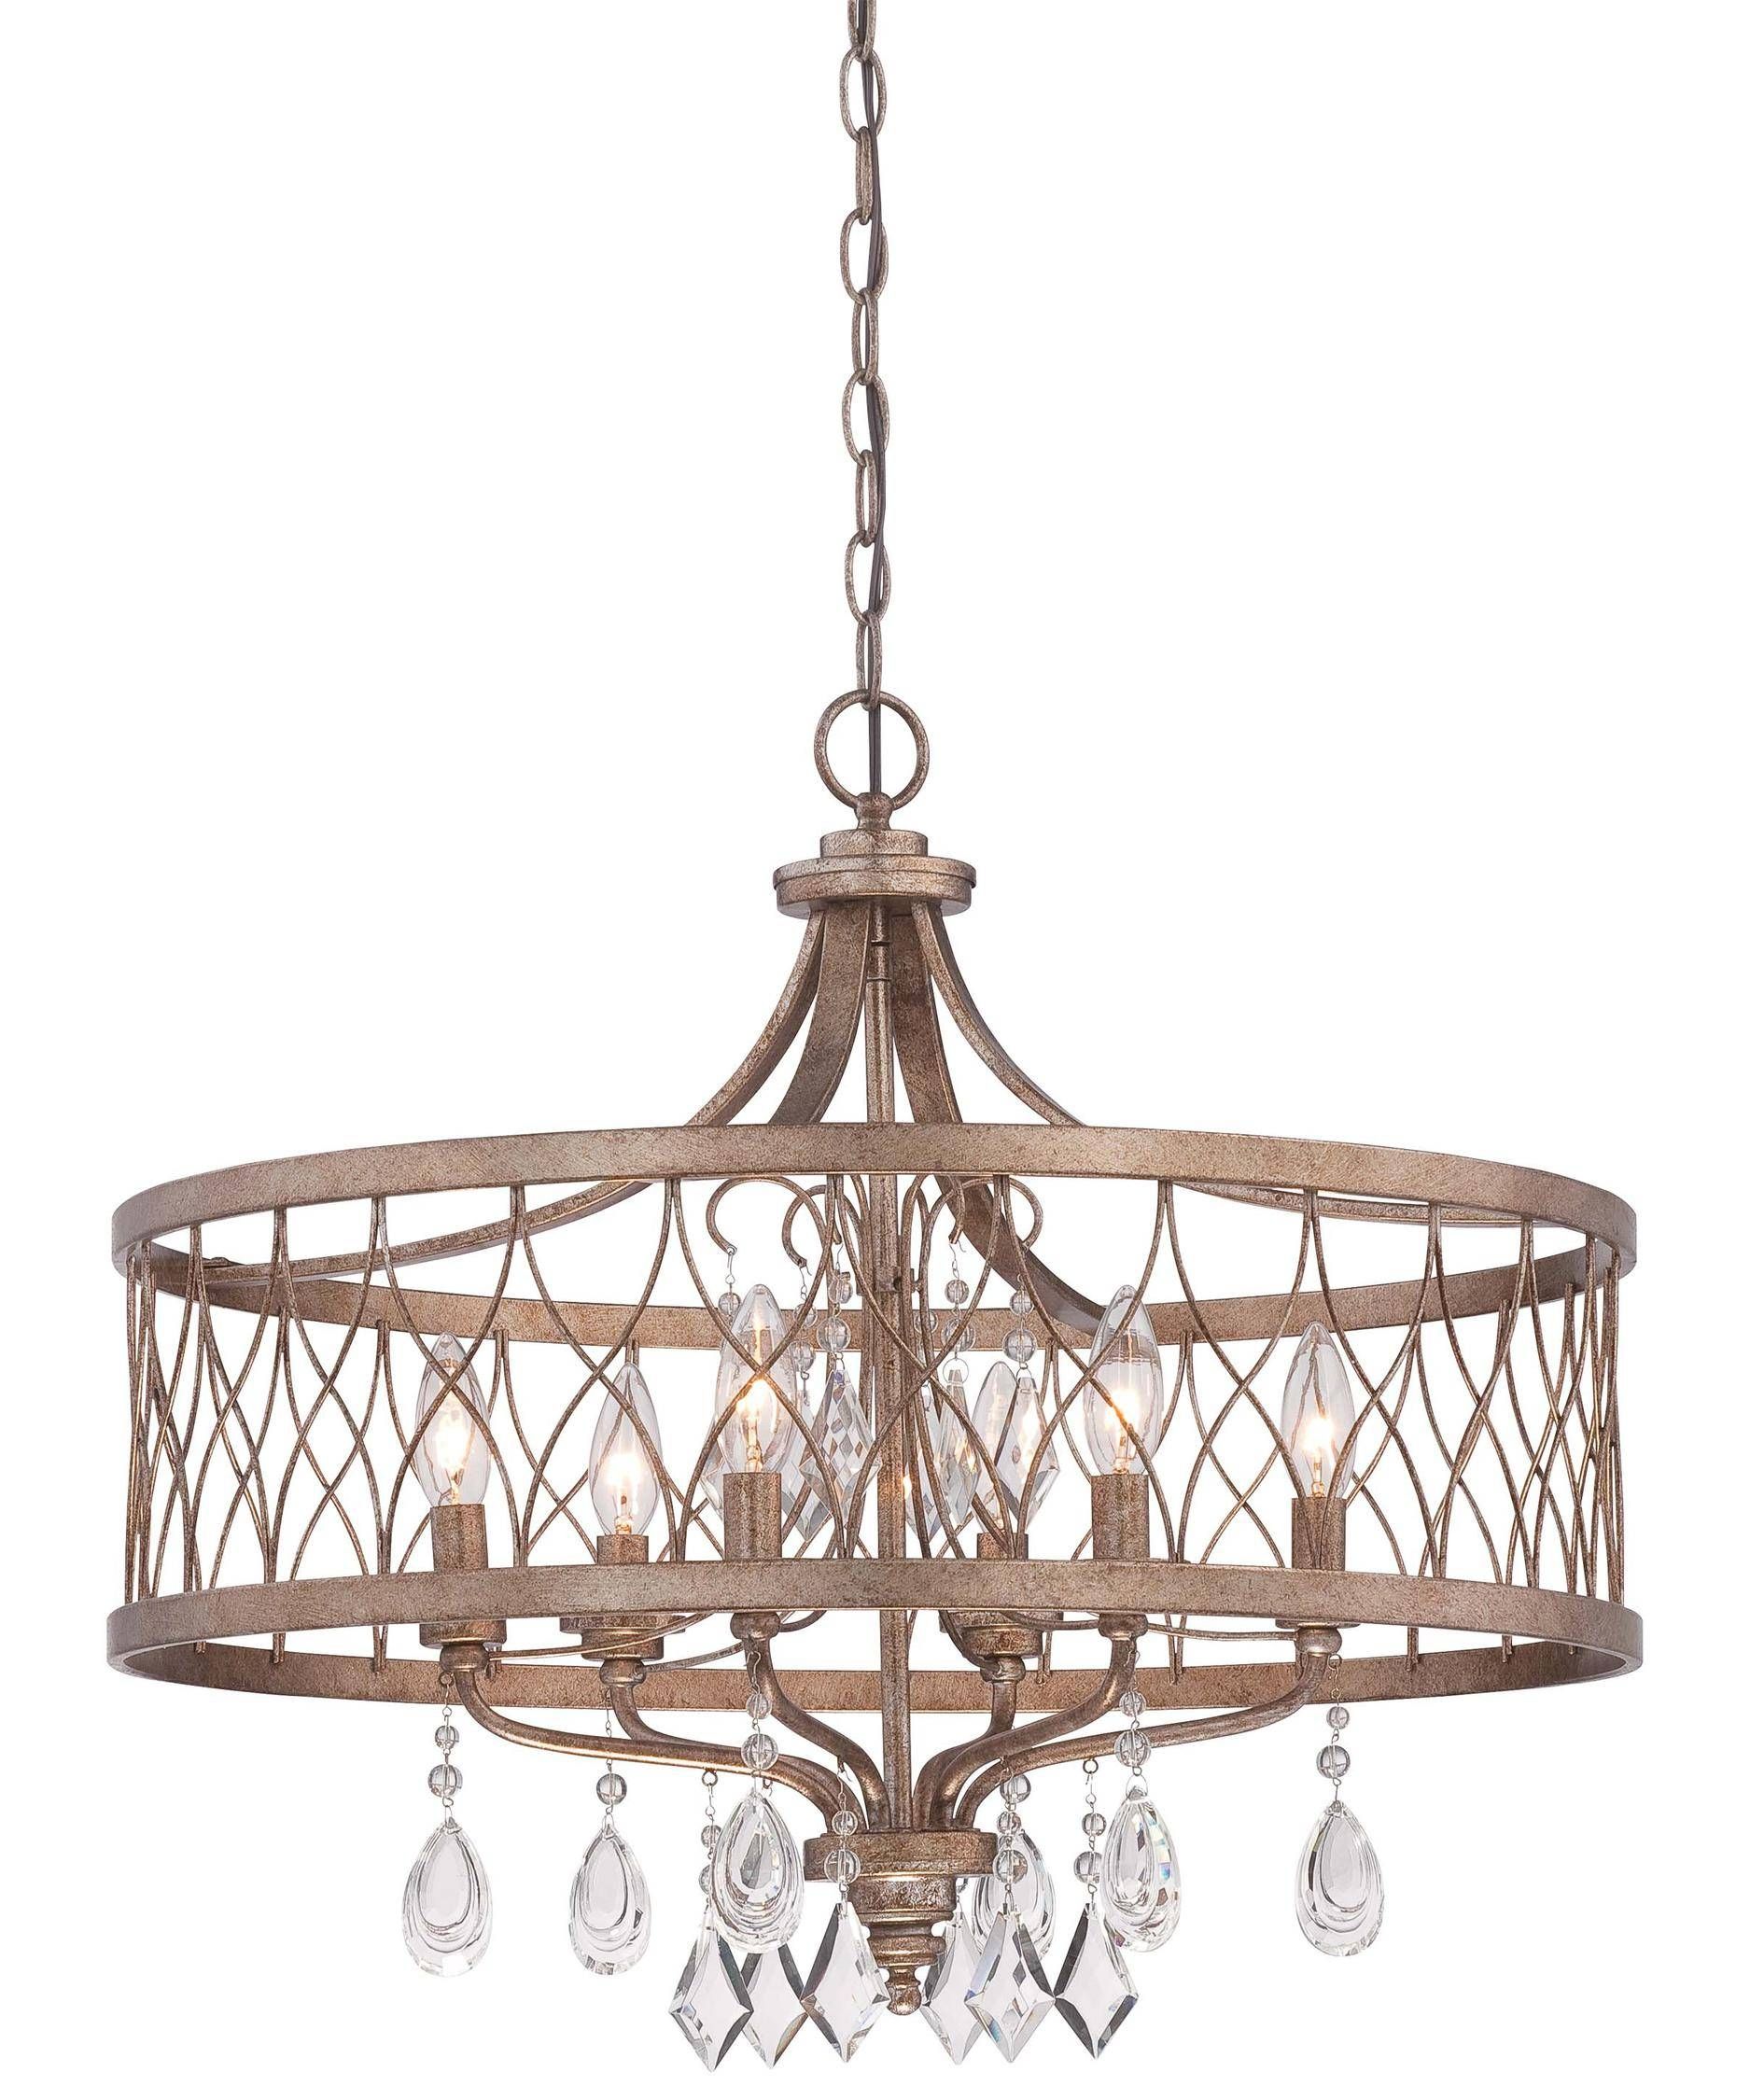 Minka Lavery 4406 West Liberty 24 Inch Wide 6 Light Large Pendant With Regard To Minka Lavery Pendants (View 9 of 15)